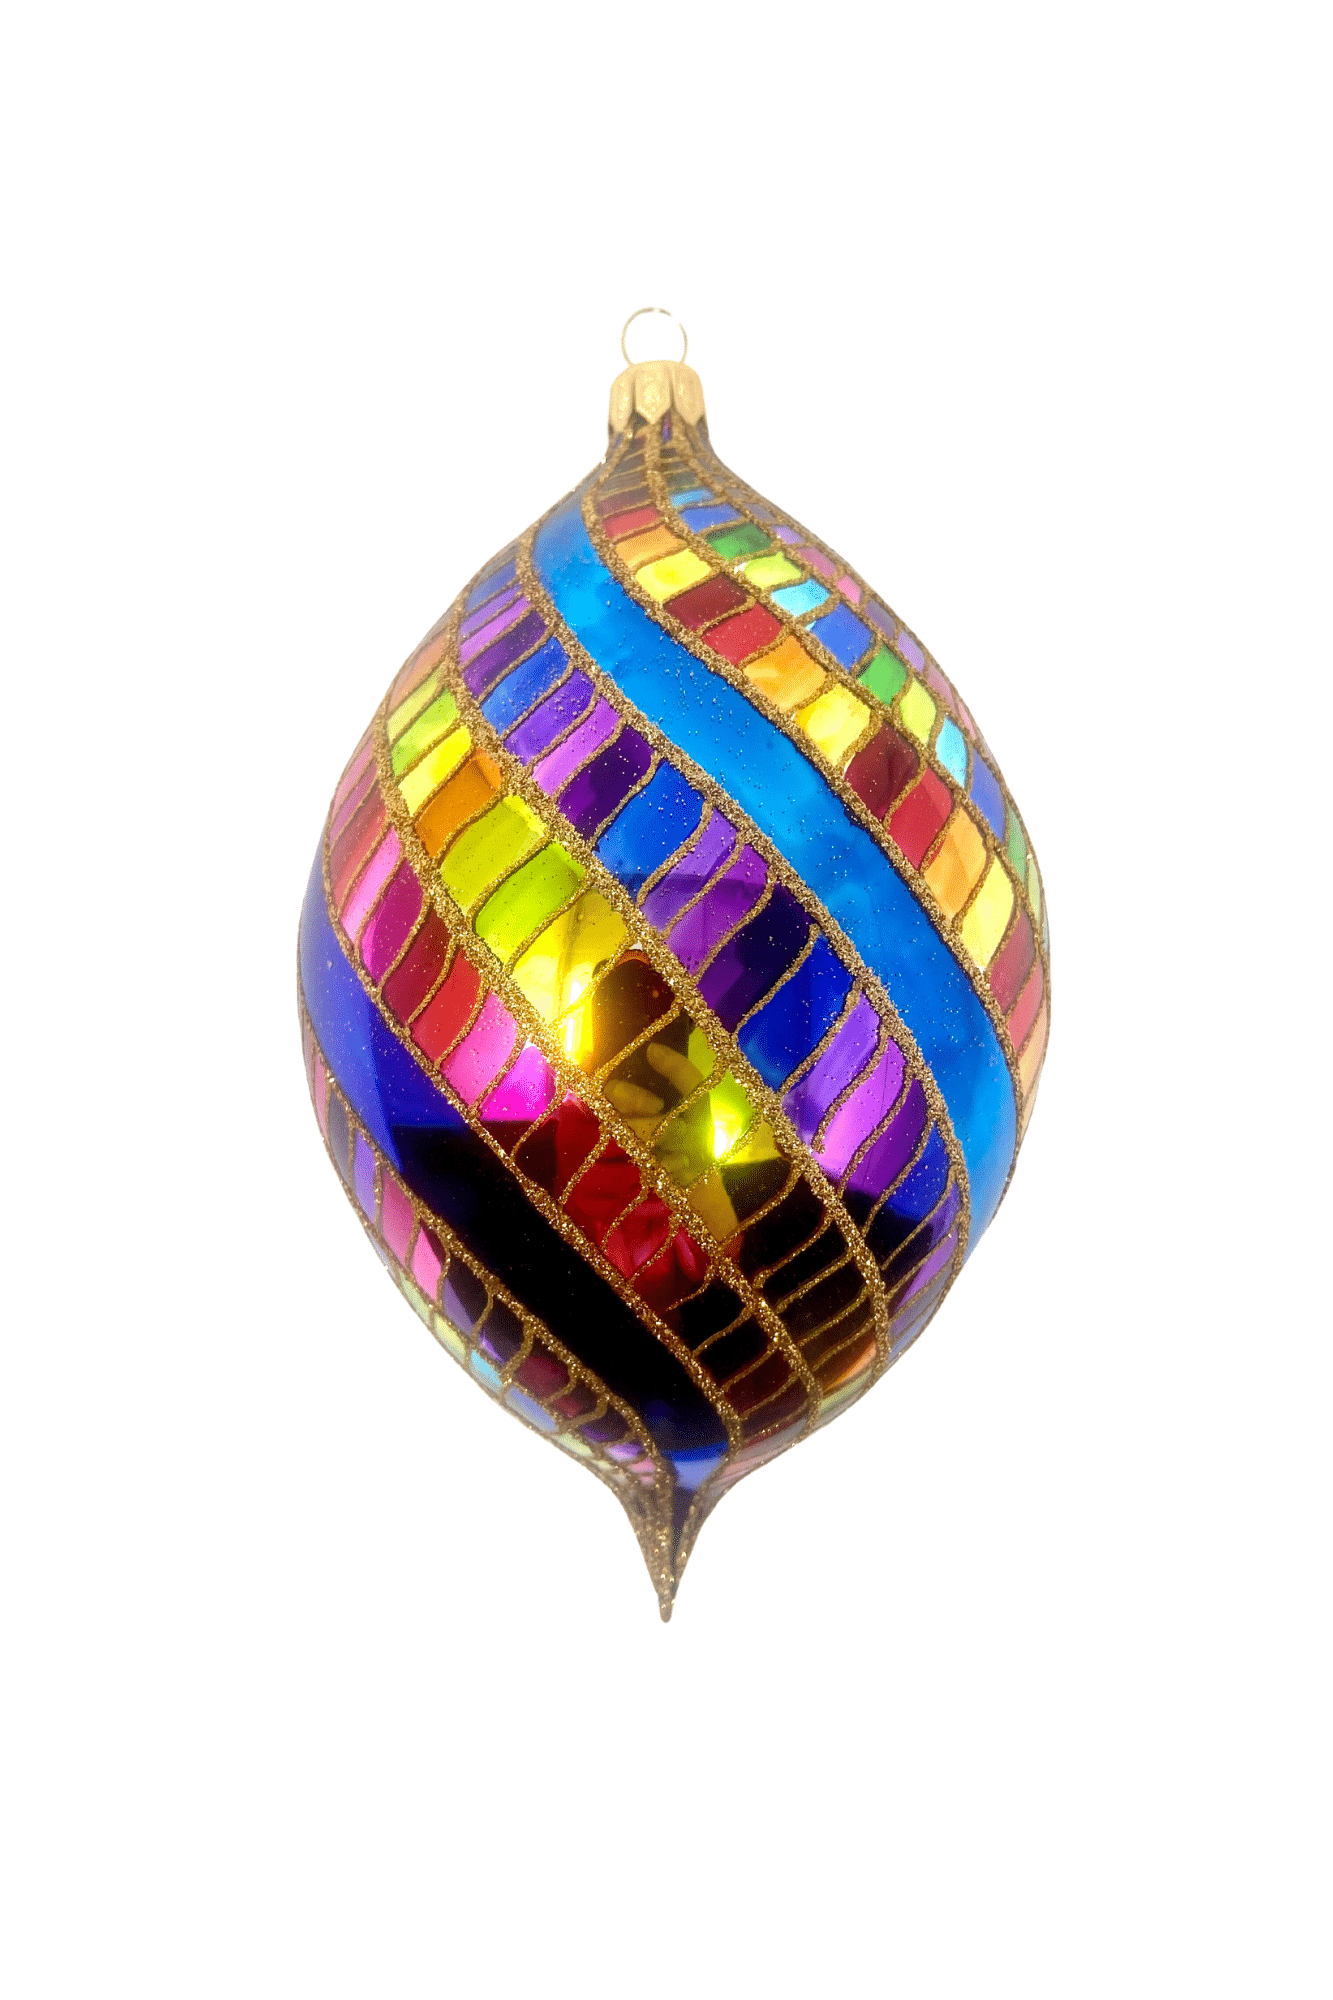 Beautiful las vegas style ornament with multicolored stripes and rainbow patterning.